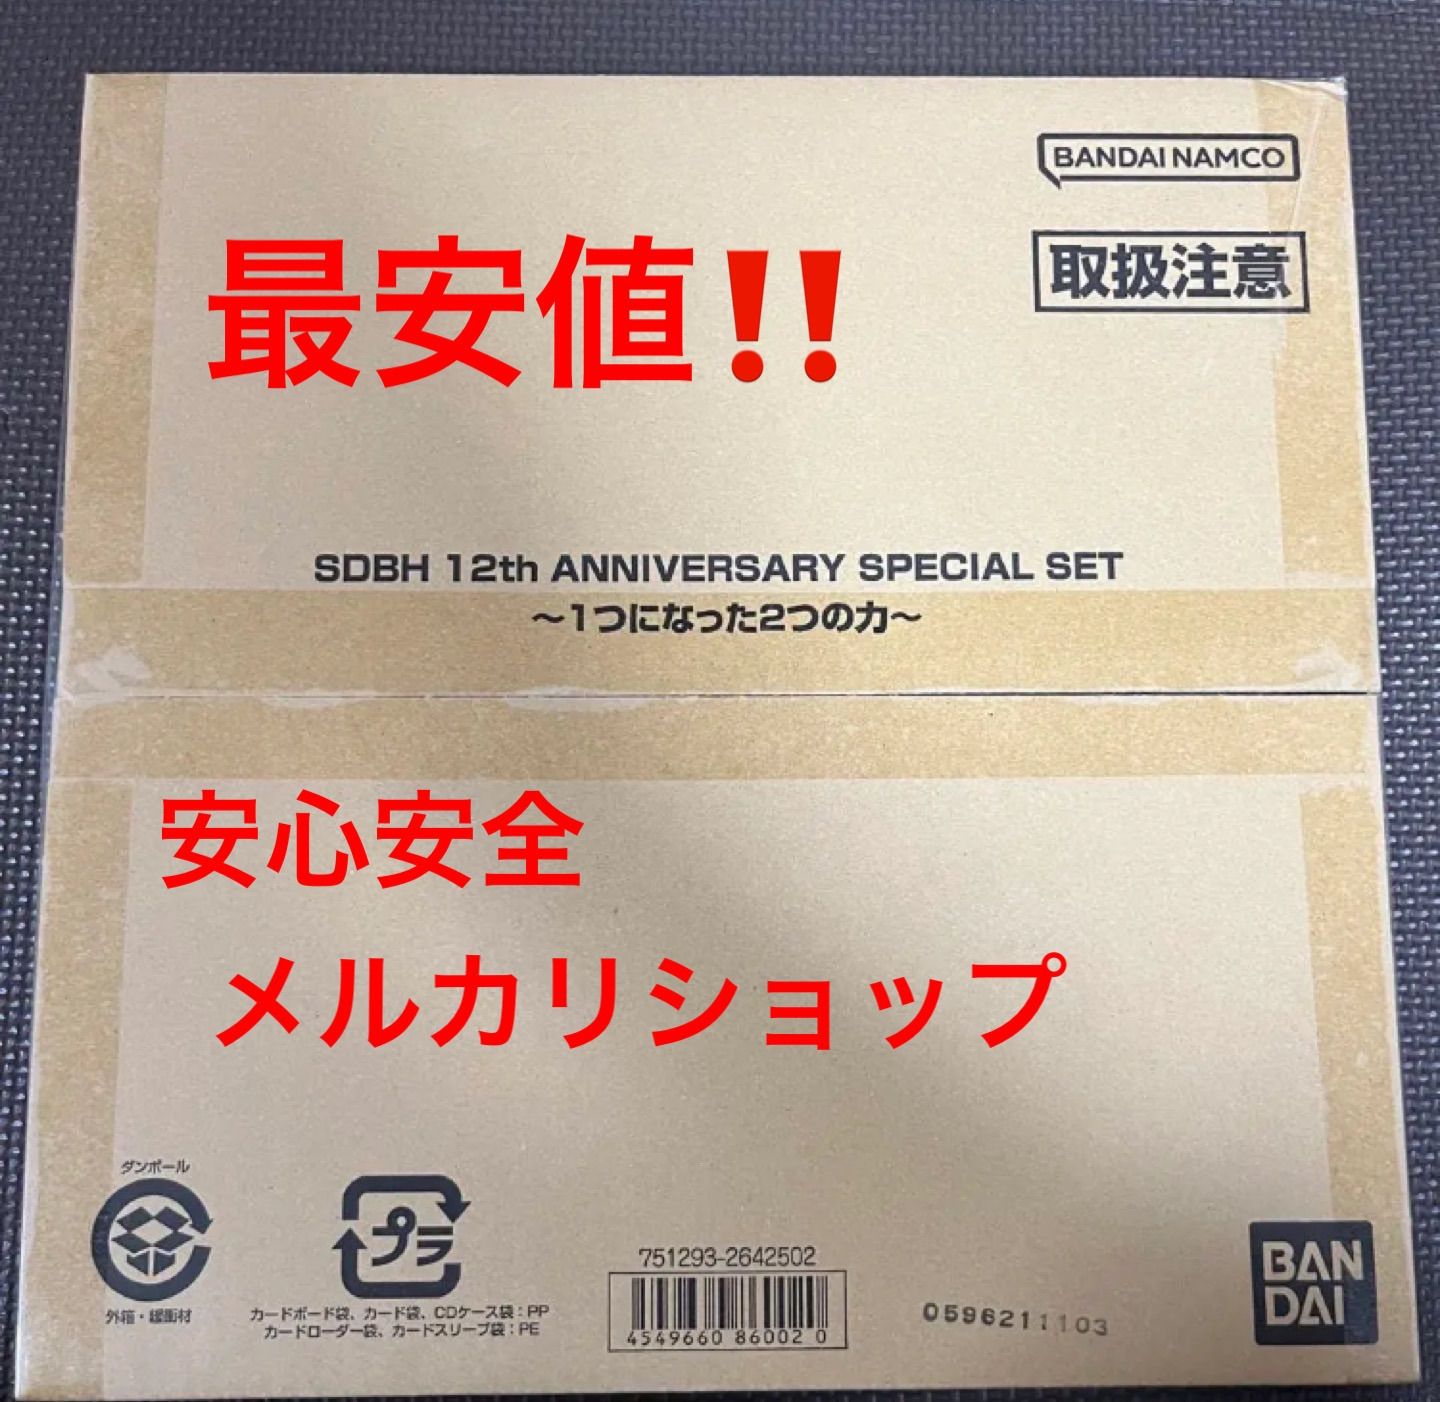 SDBH 12th ANNIVERSARY SPECIAL SET